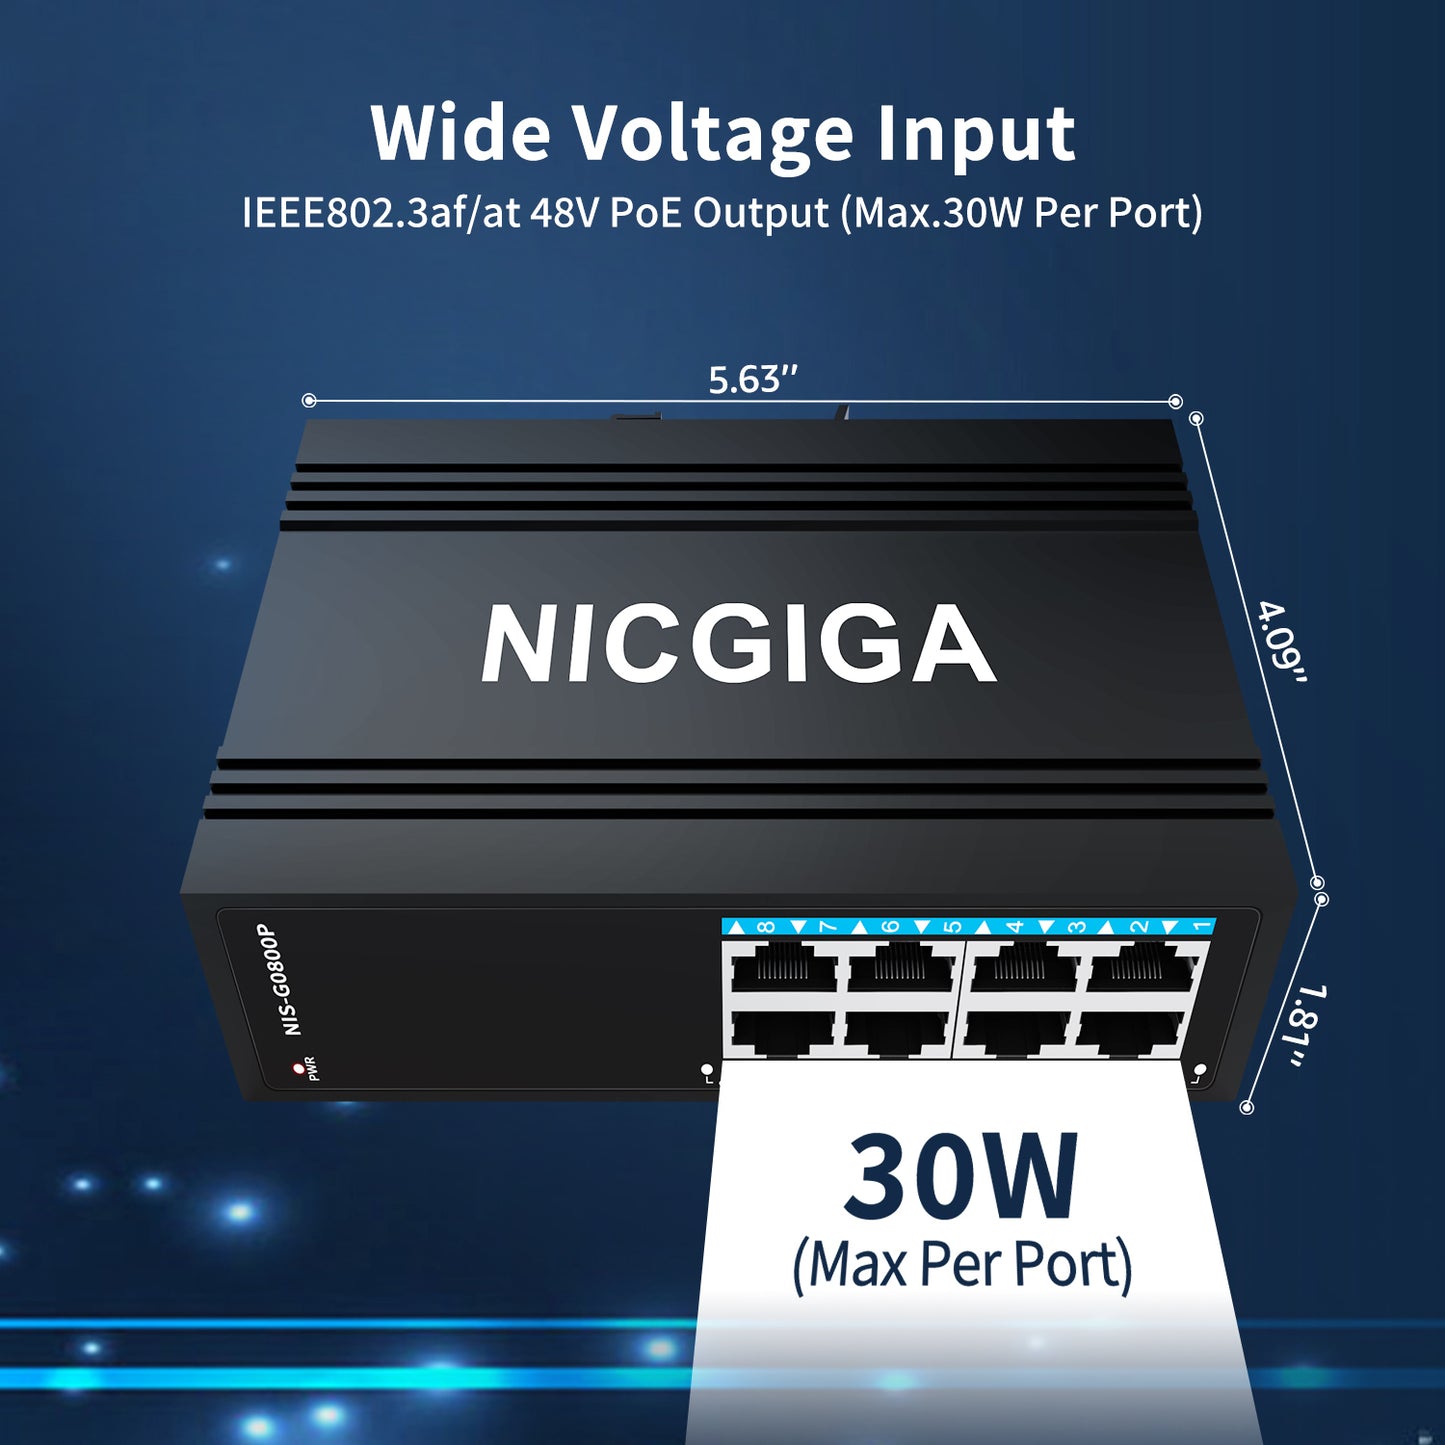 NICGIGA 8 Port Industrial Gigabit PoE Switch DIN-Rail, with 8 x IEEE802.3af/at 30W PoE Ports @245W Port Industrial PoE Network Ethernet Switch. IP40 Metal Enclosure(-30° to 75°)